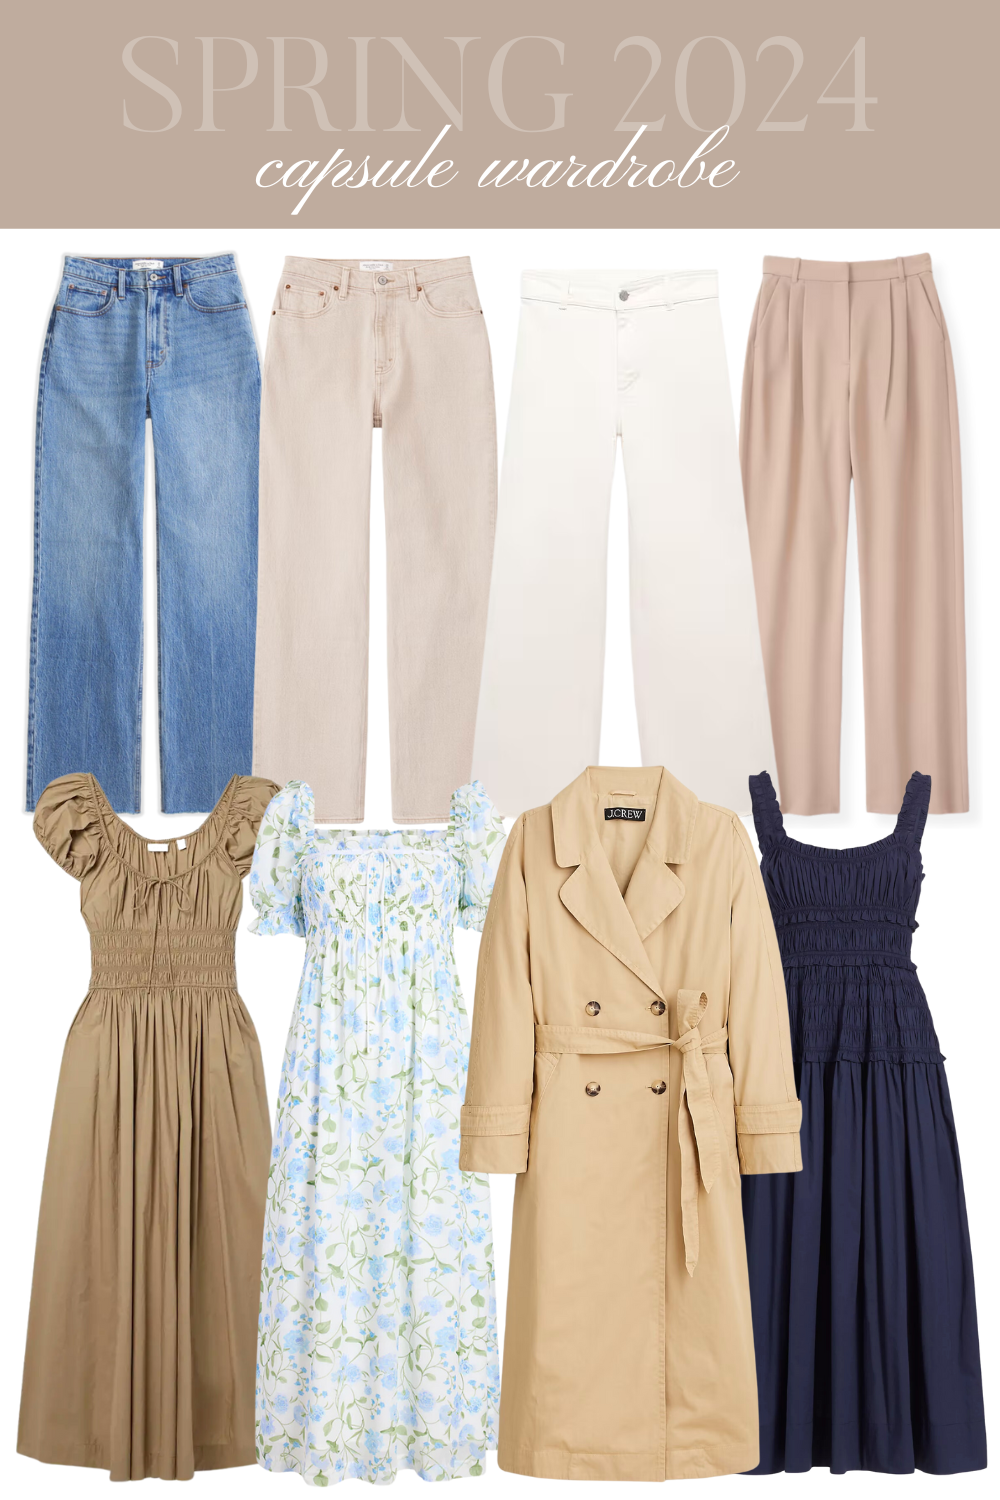 spring 2024 capsule wardrobe bottoms and dresses